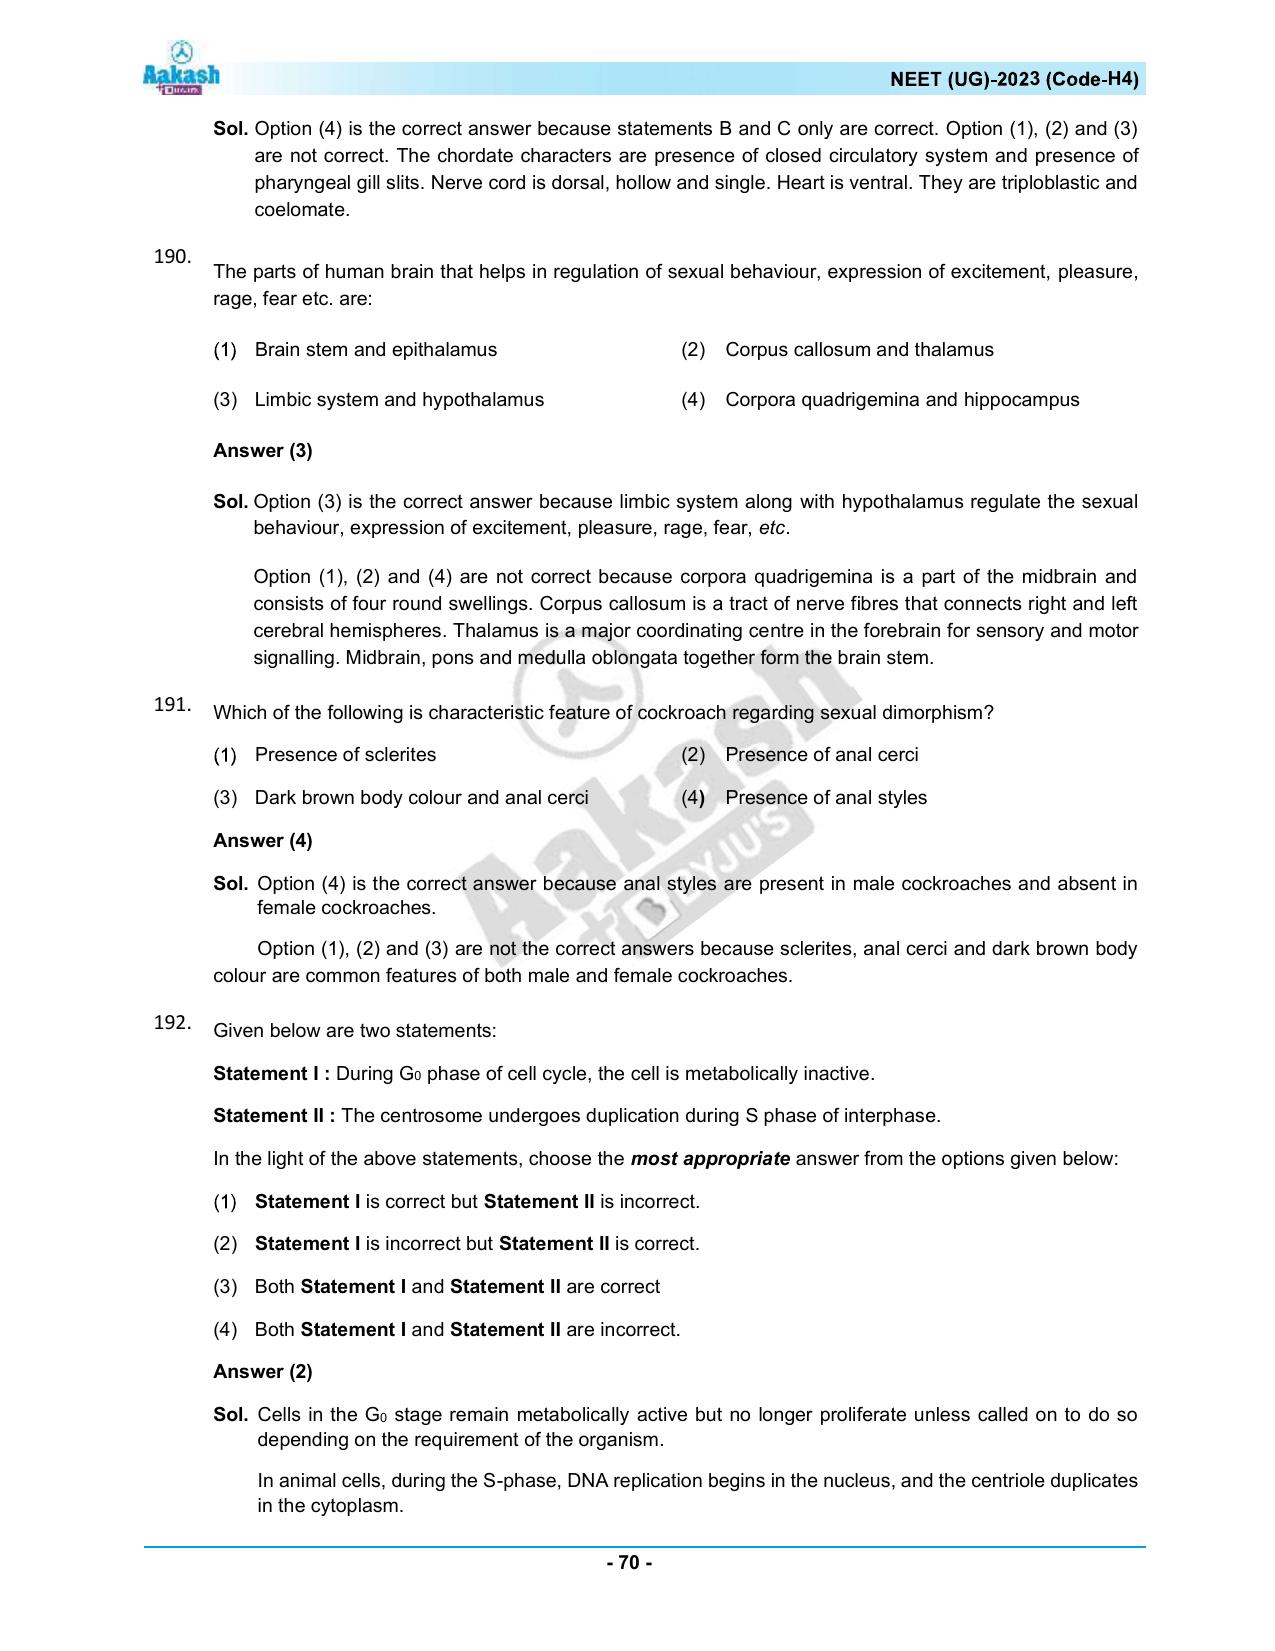 NEET 2023 Question Paper H4 - Page 70